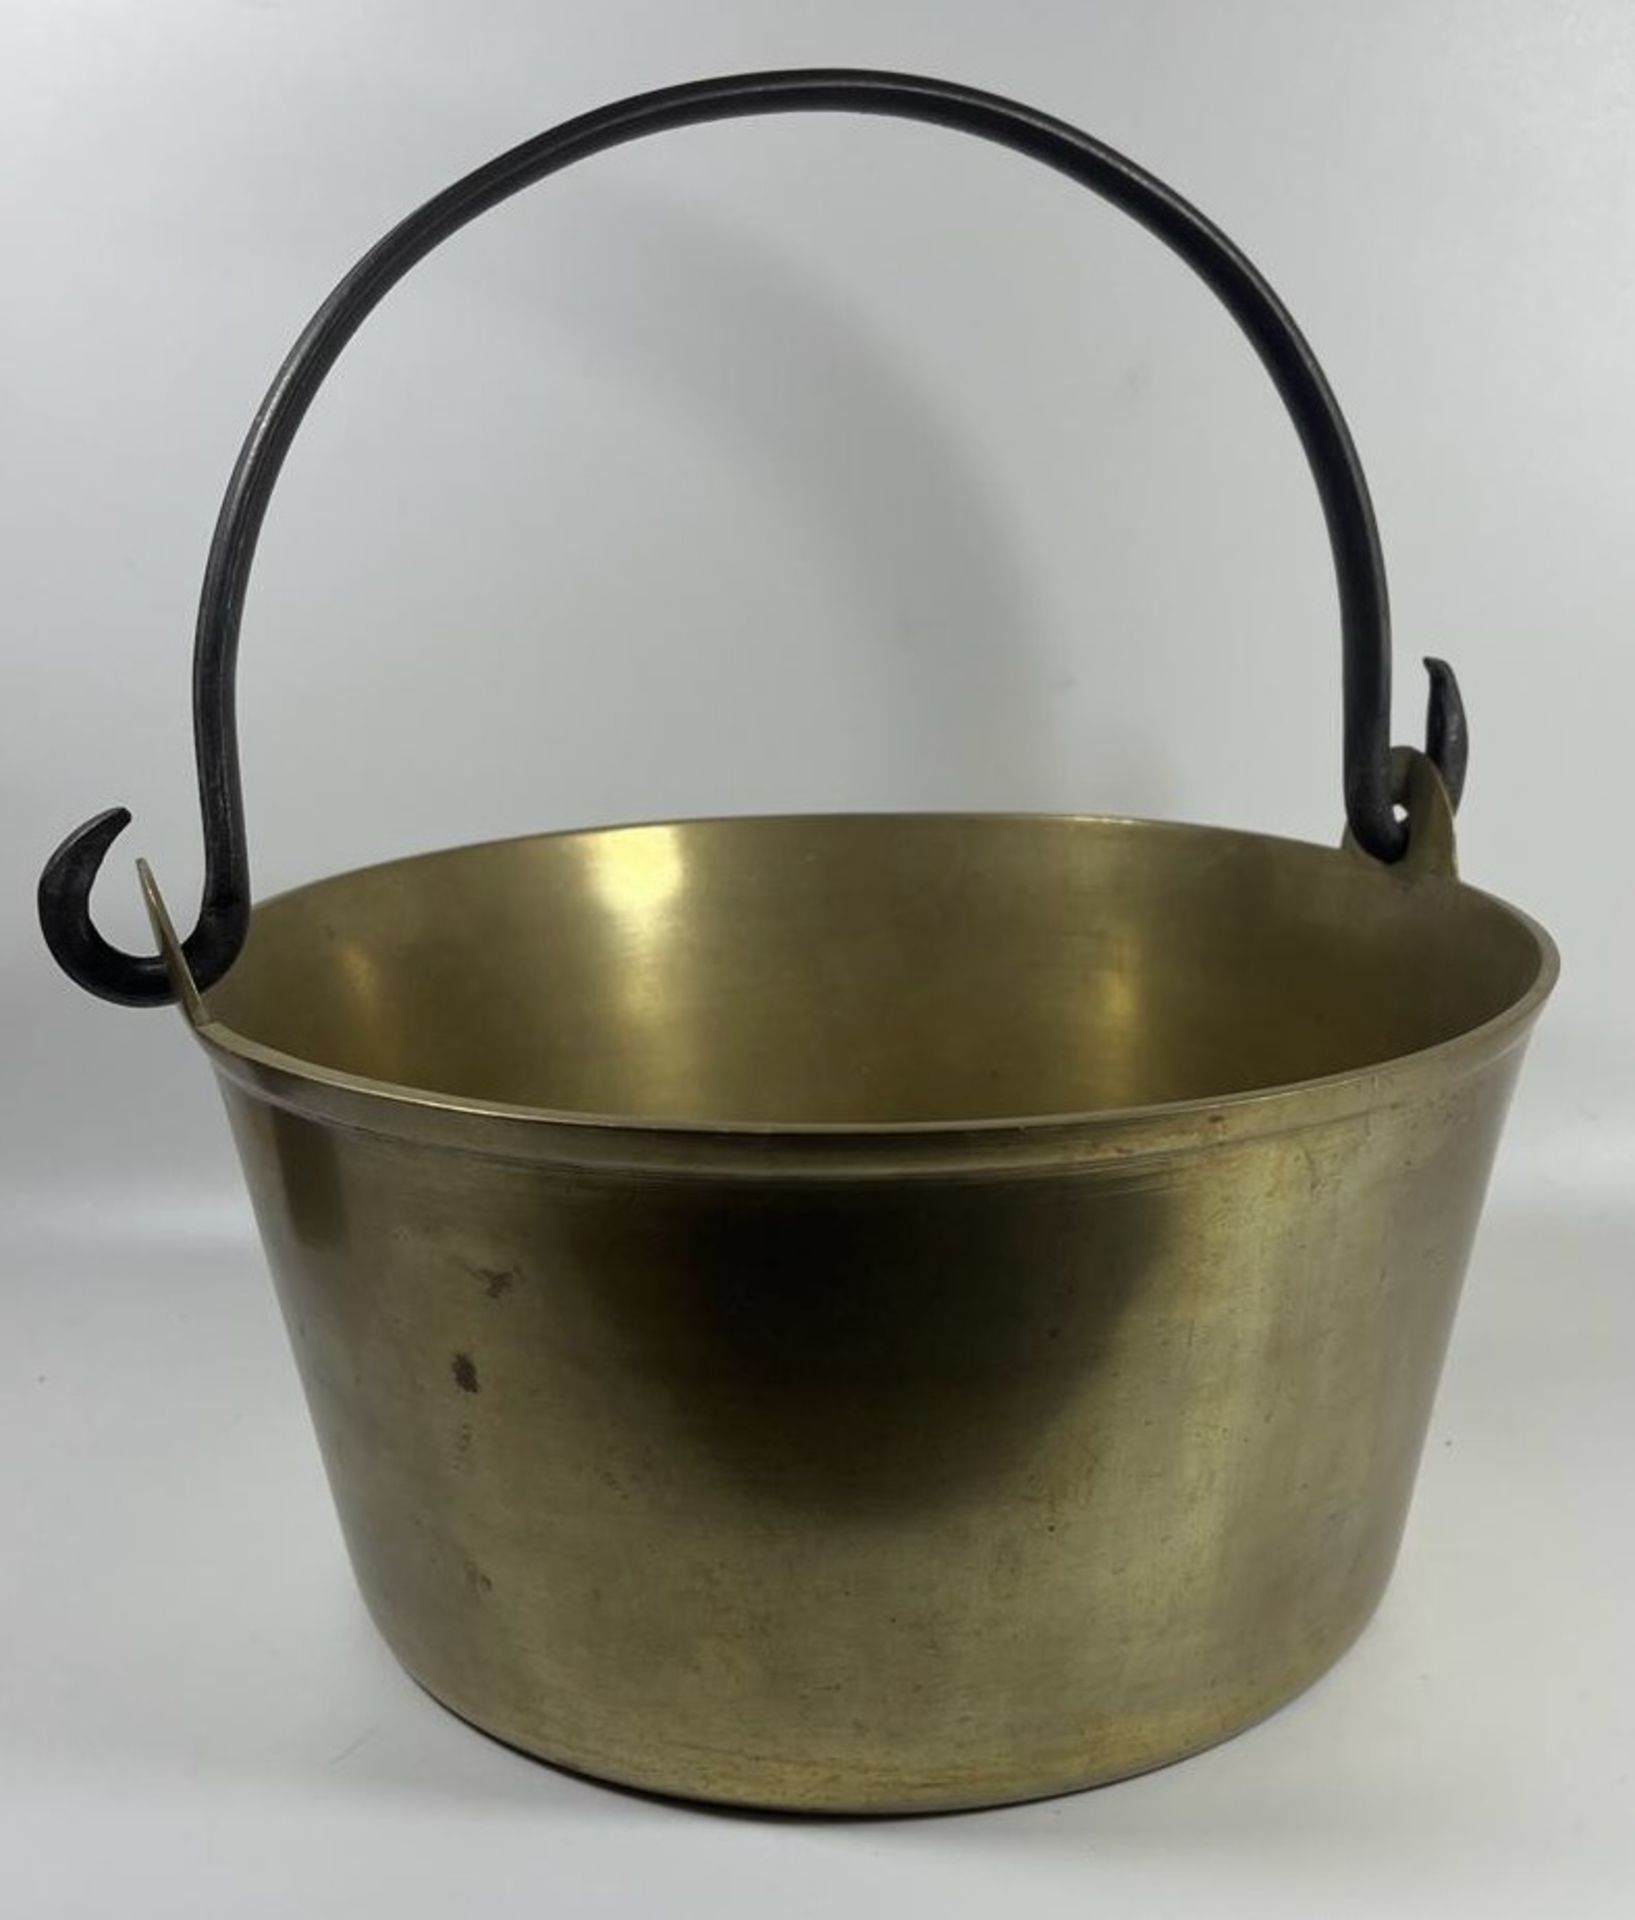 A HEAVY EARLY 20TH CENTURY BRASS JAM PAN / COOKING POT WITH CAST IRON HANDLE